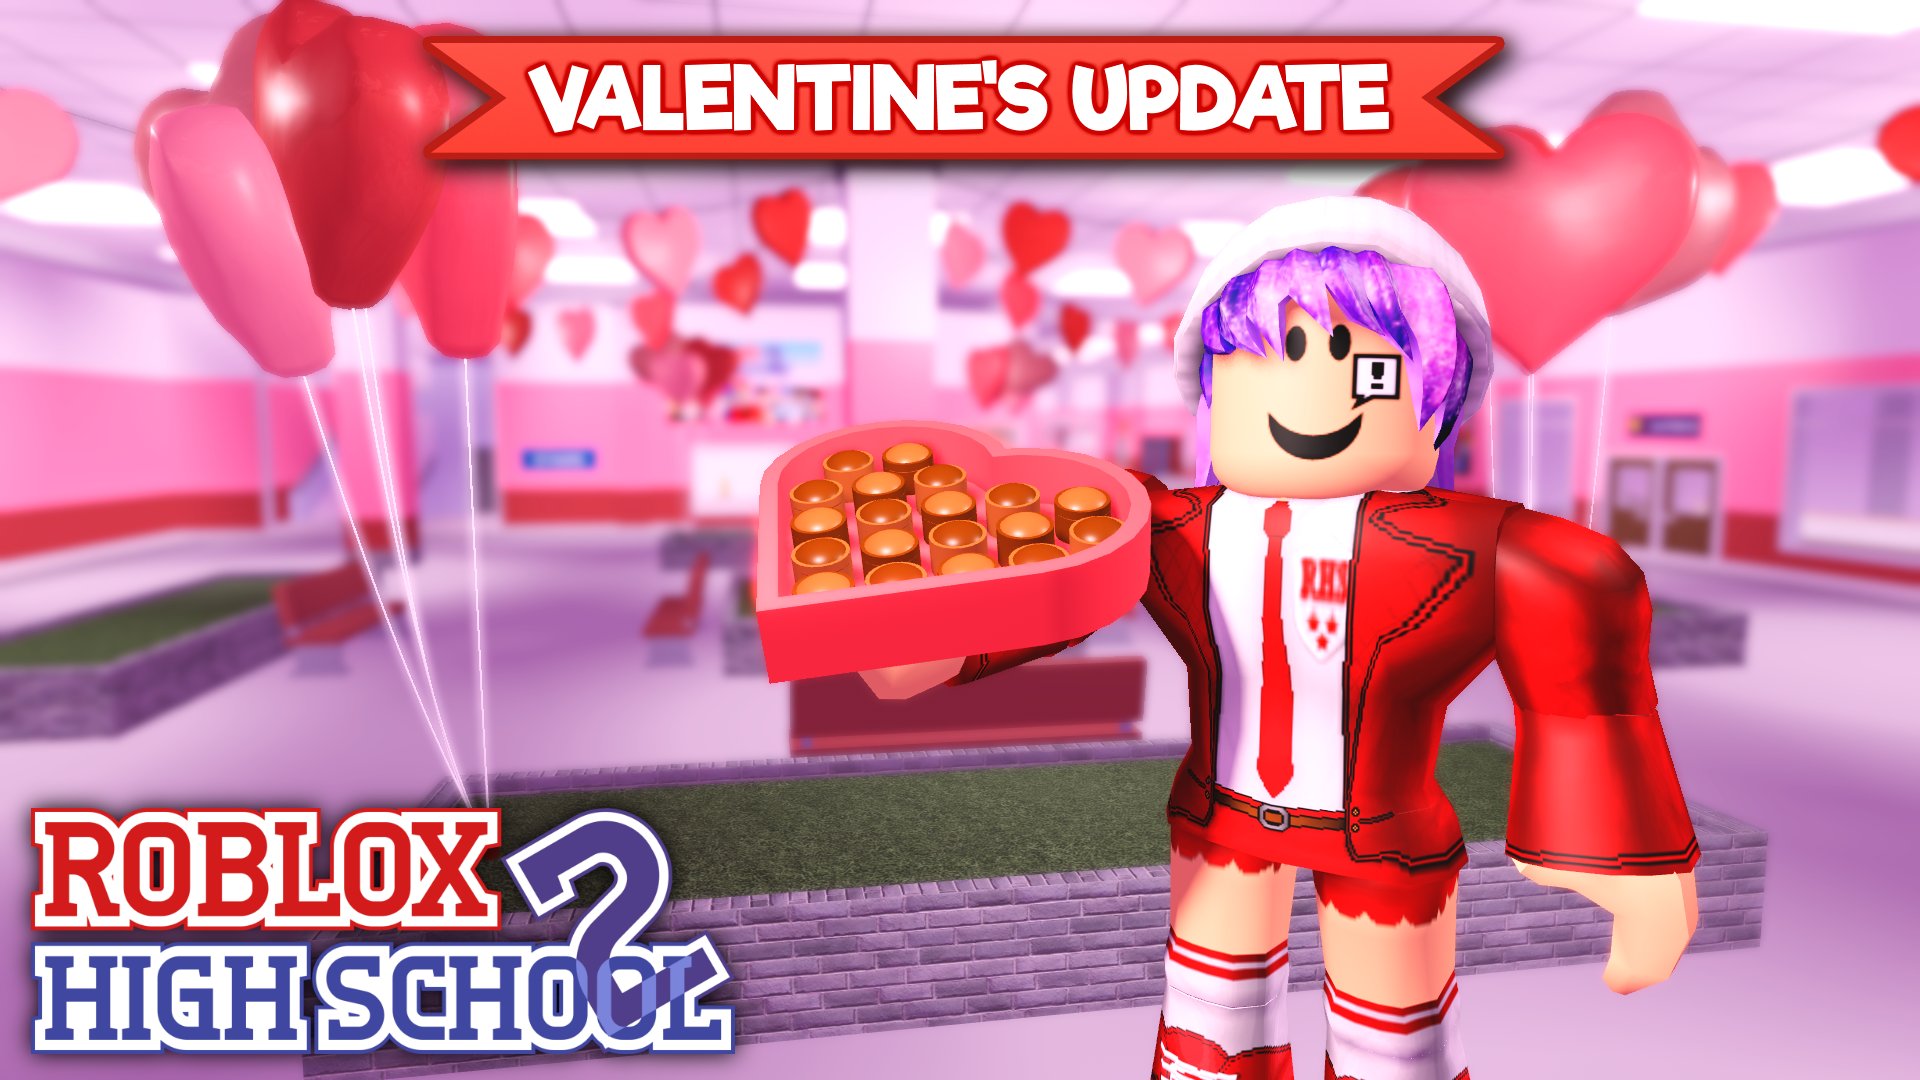 Roblox High School 2 on Twitter: "RHS2's Valentine's Update is now live! 💕 The Valentine's themed map is back, and Valentine's furniture is available in the shop for a time only!